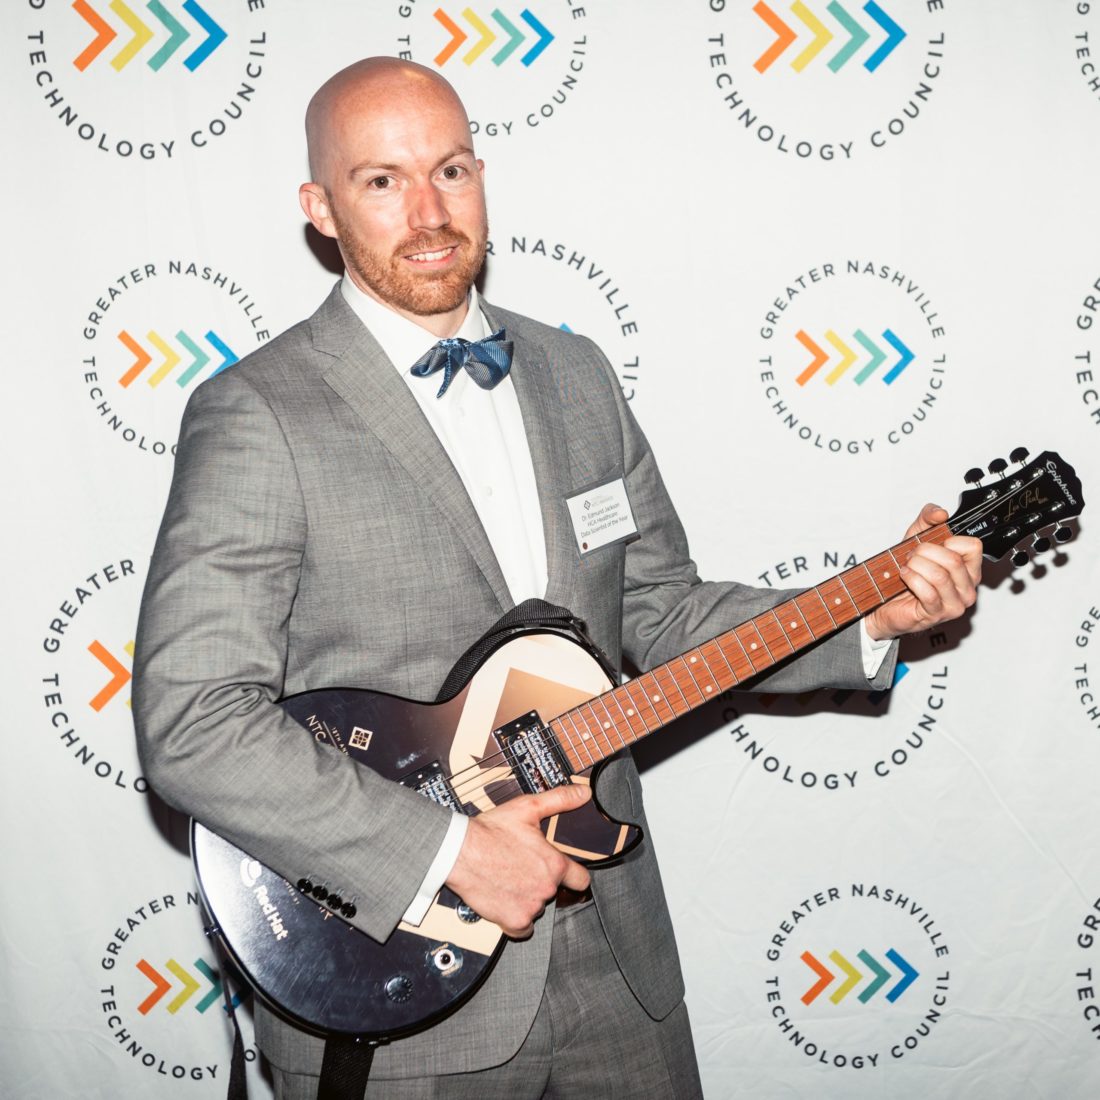 Man wearing suit and bowtie holding an electric guitar. 